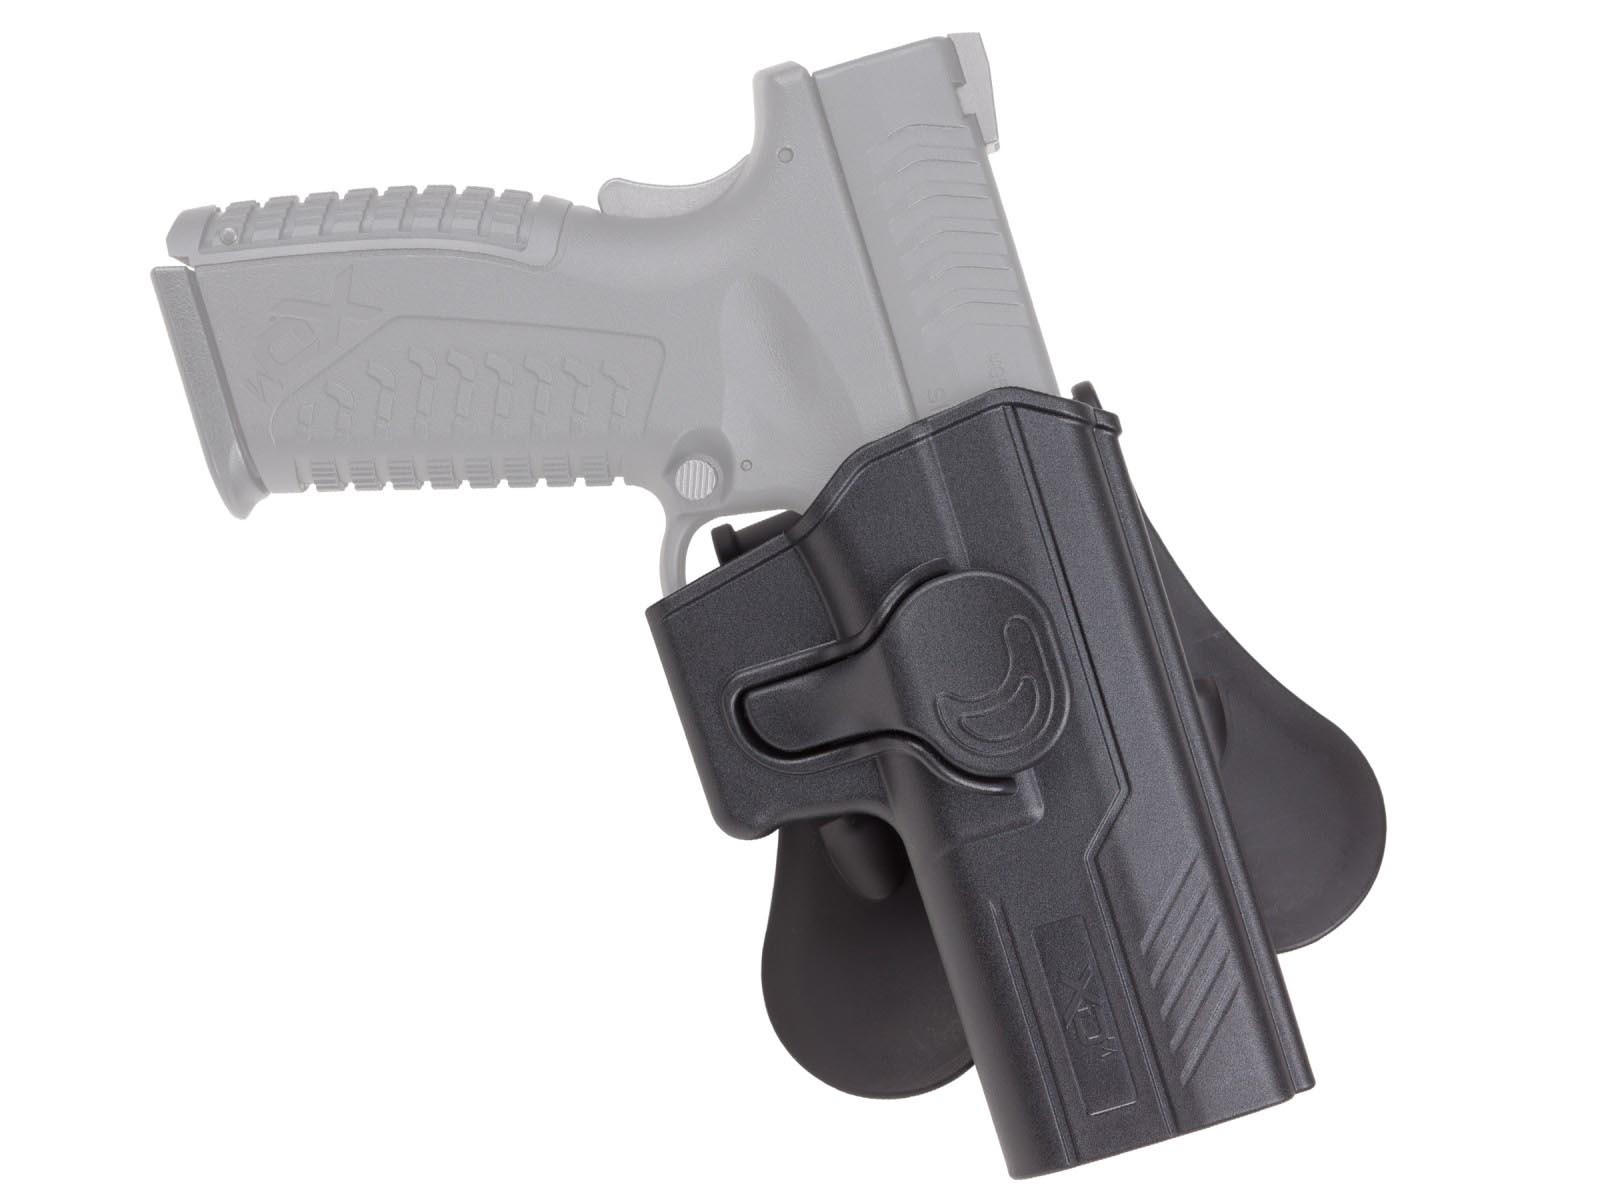 Springfield Armory XDM Holster, Right Hand